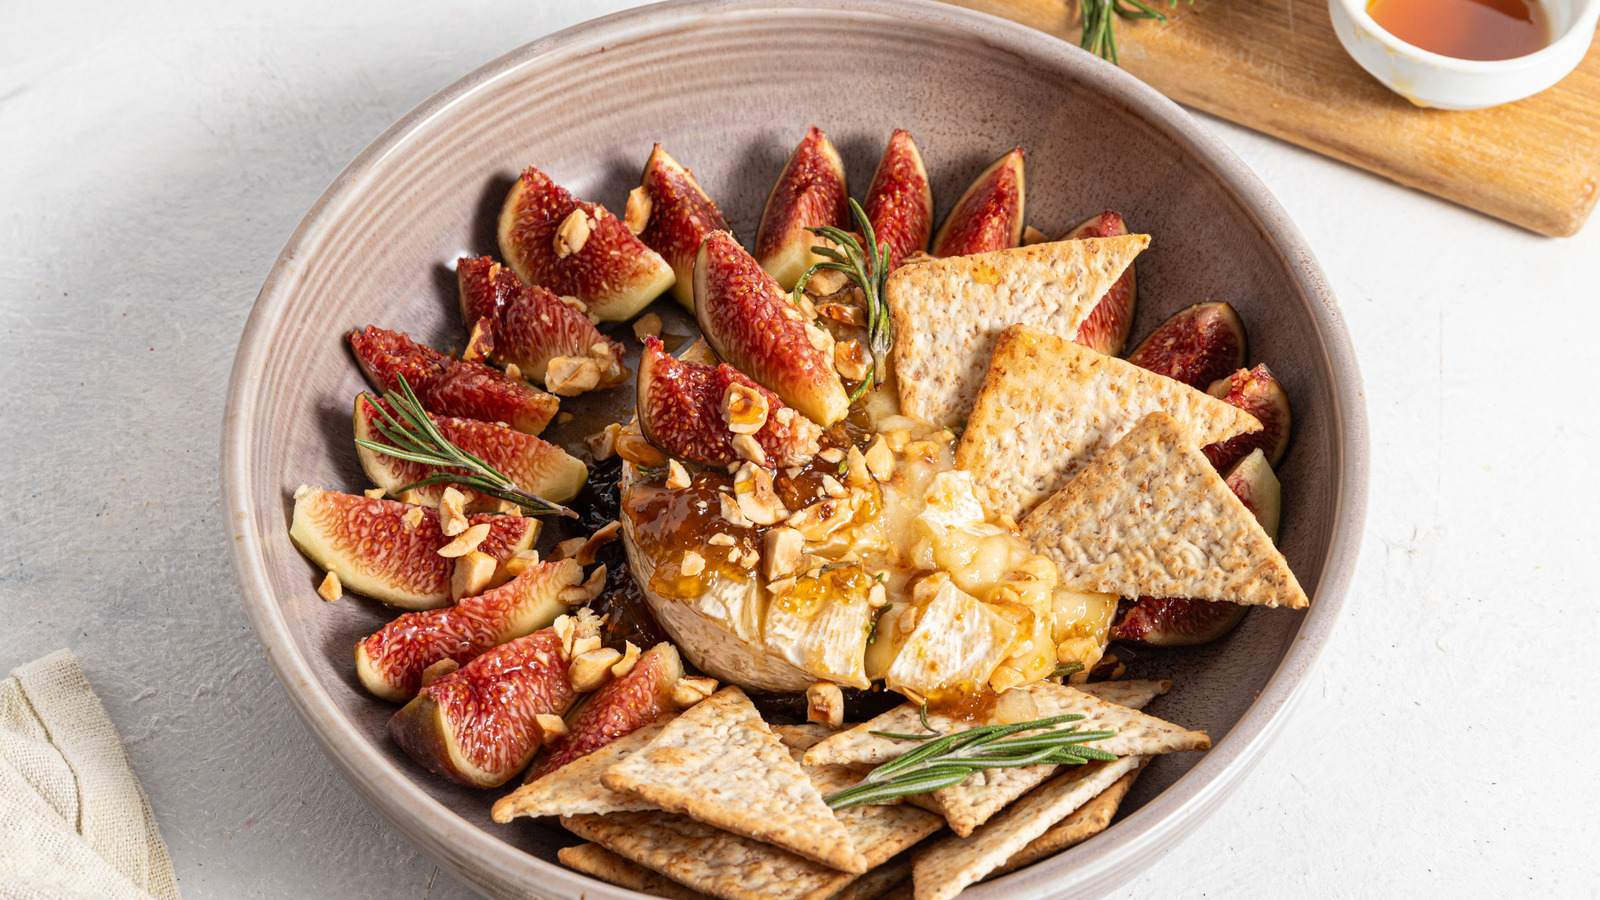 Baked Brie Recipe with Hazelnuts and Figs